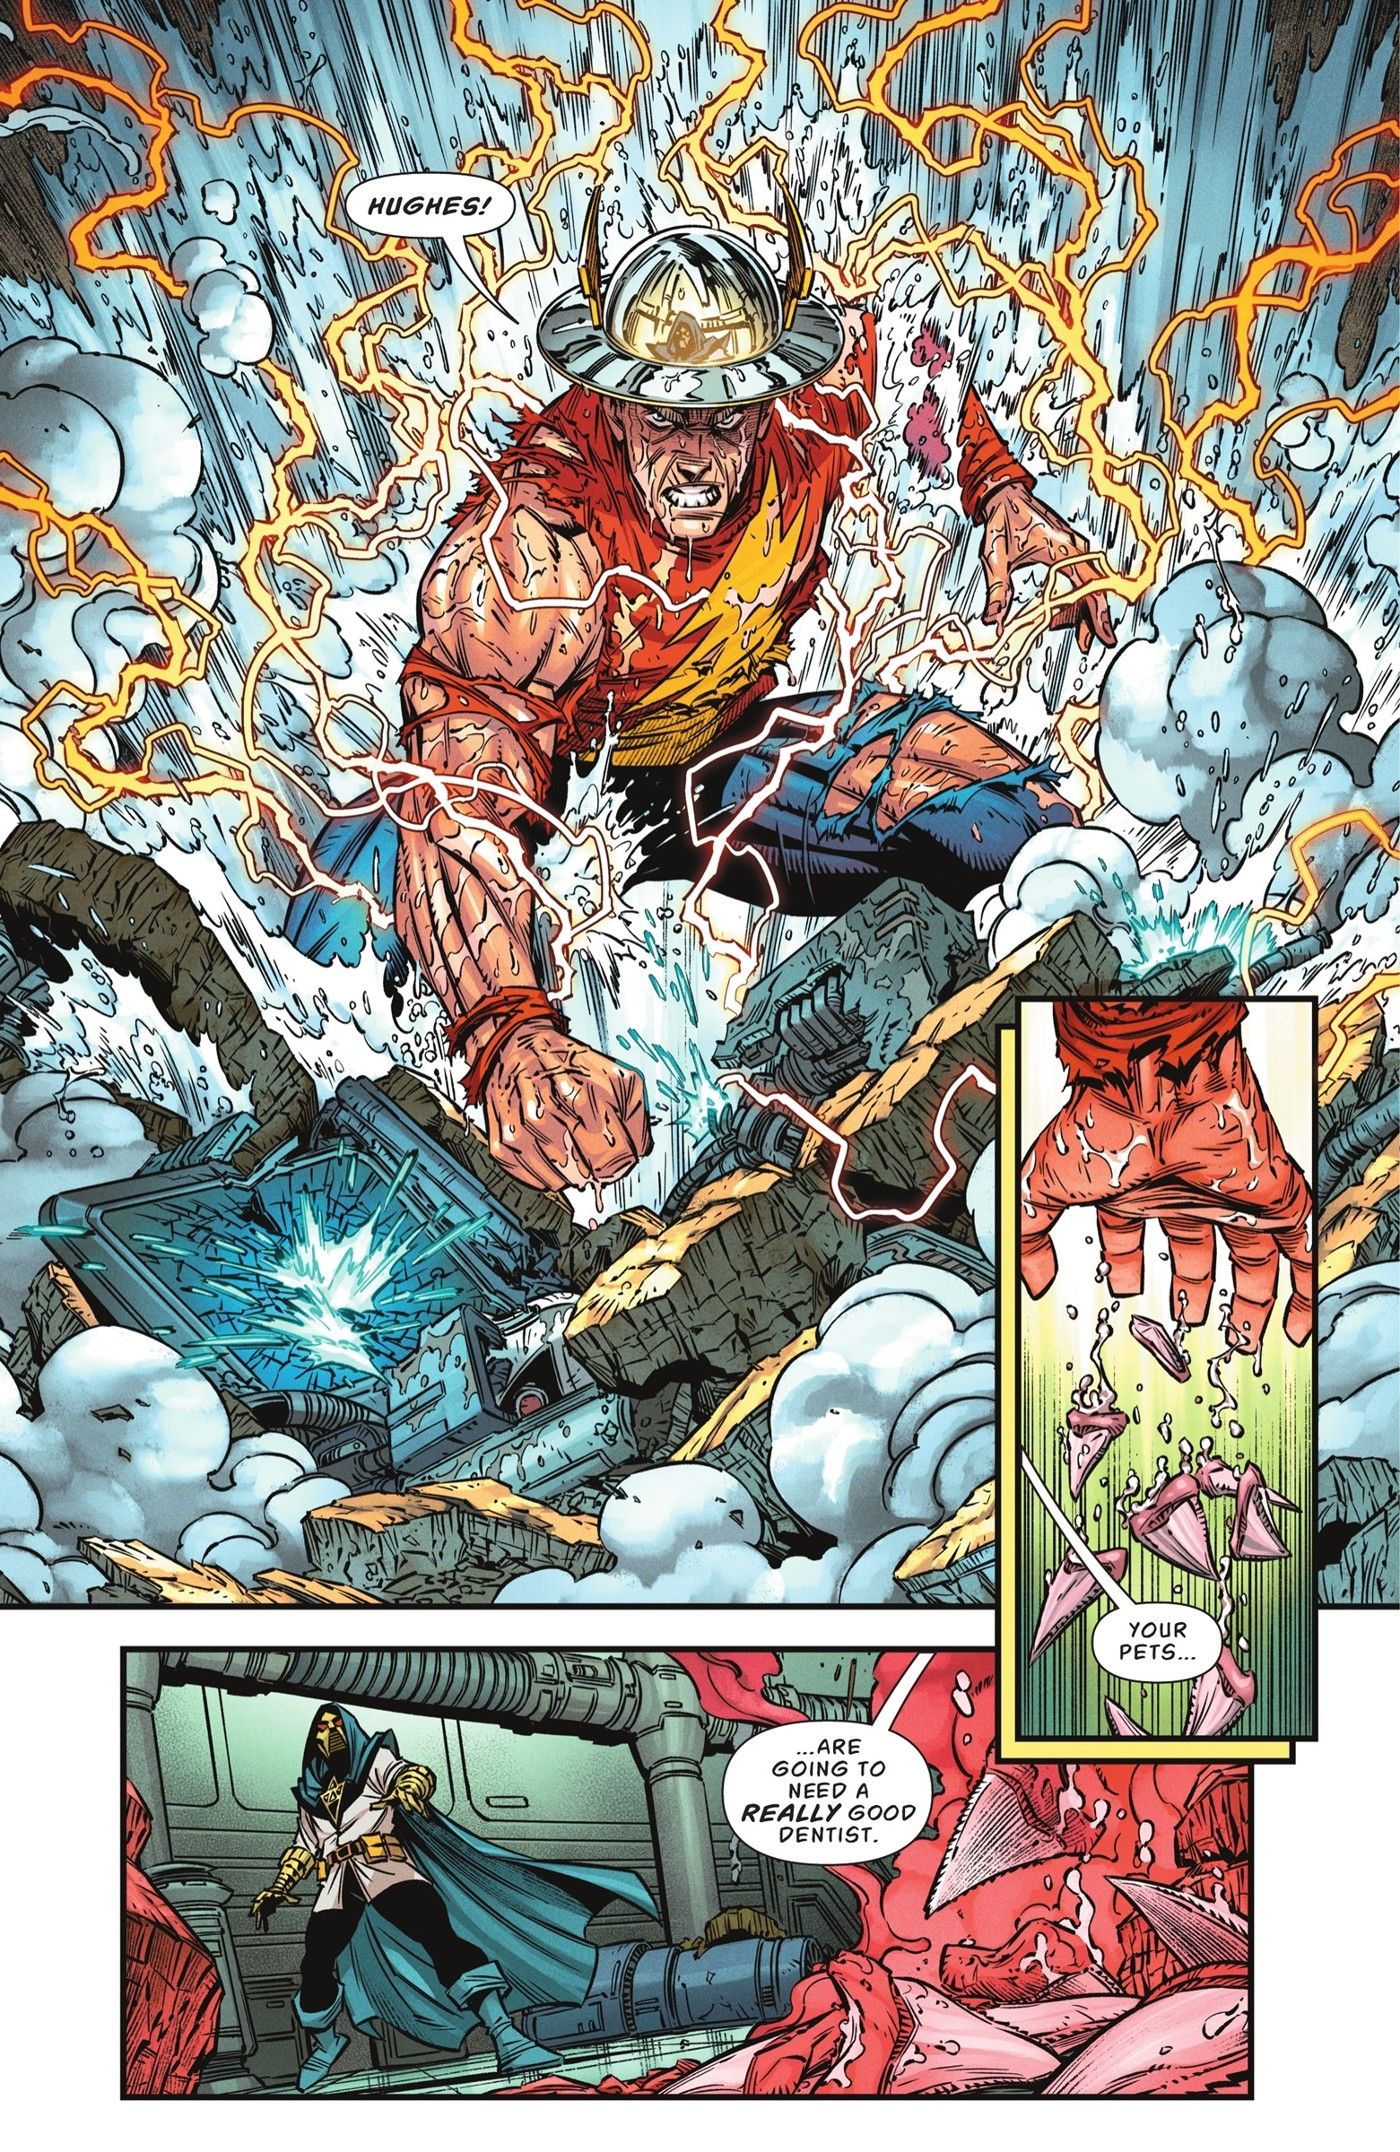 Image of Jay Garrick bursting through the floor with remains of the mechanical sharks.